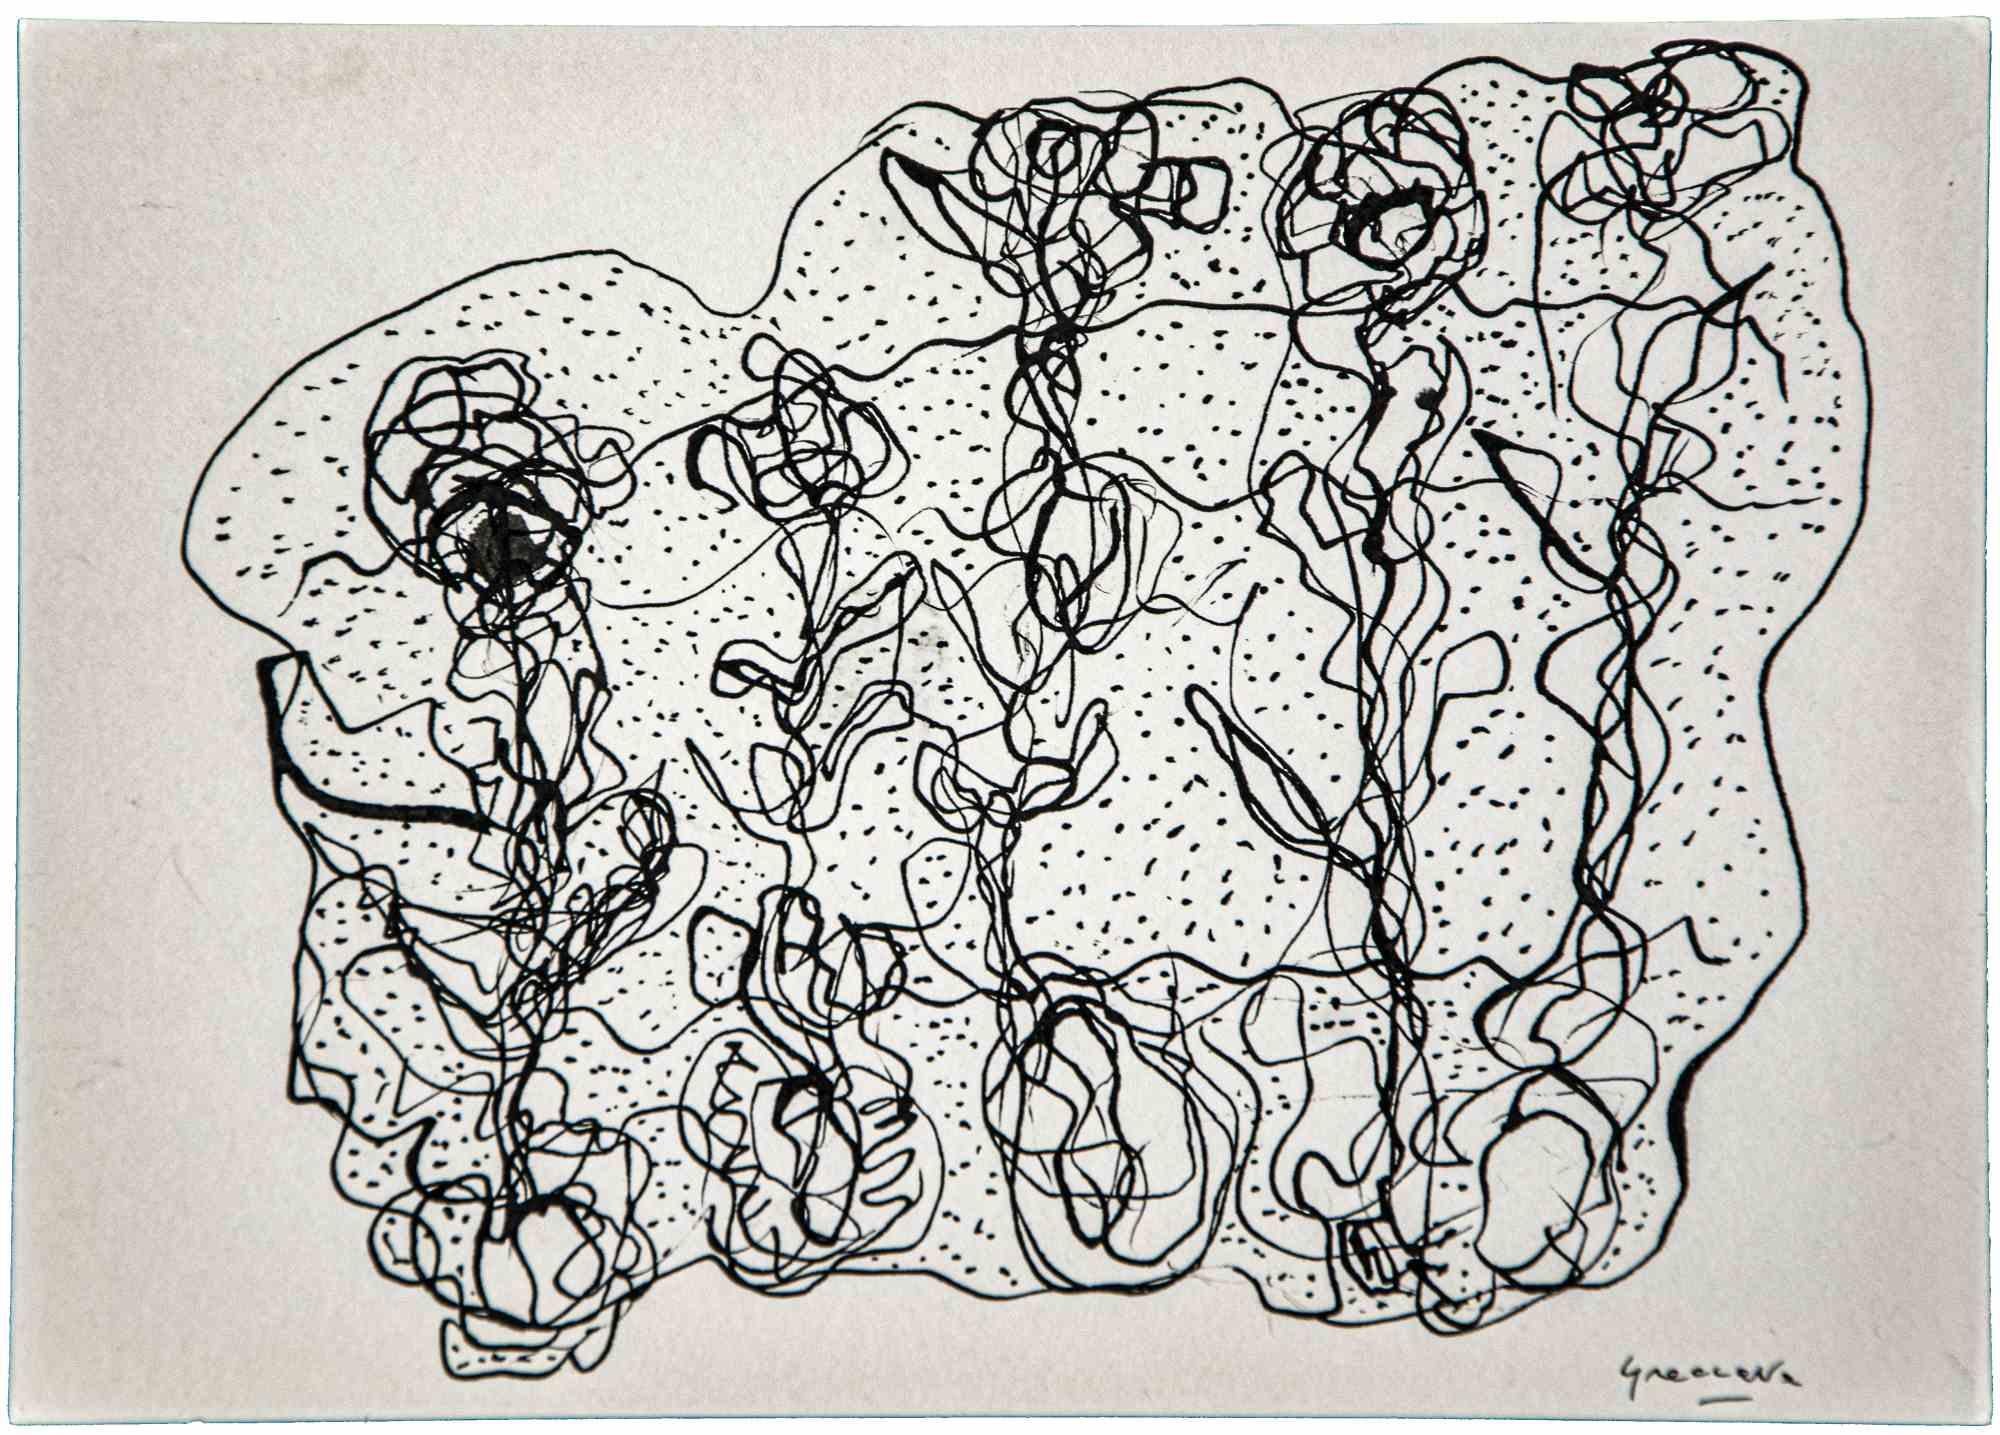 Abstract Composition is an original artwork realized by Maurizio Gracceva (Roma, 1955) in 2010.

China ink.

Good condition.

Hand-signed.

Author of numerous philosophical and literary essays, since a very young age  Maurizio Gracceva has loved